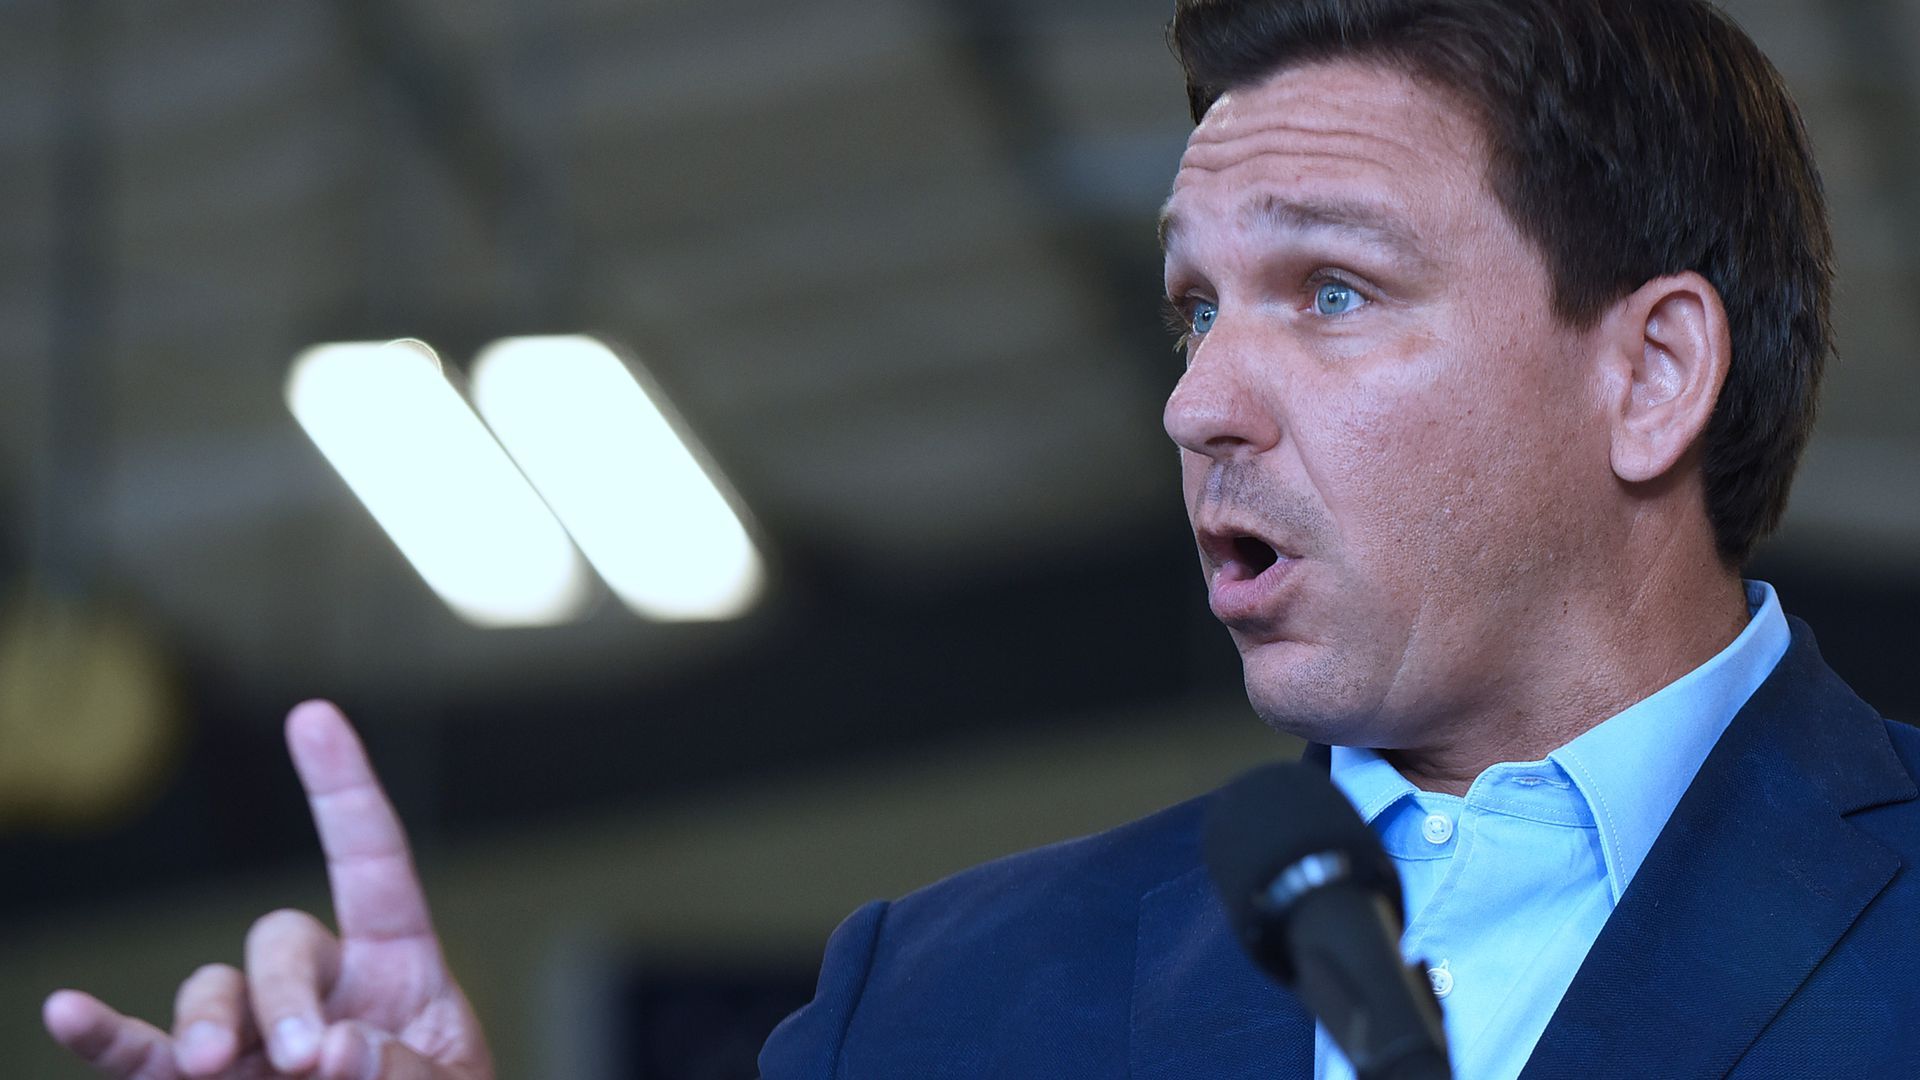 Photo of Ron DeSantis' side profile as he speaks with one hand raised